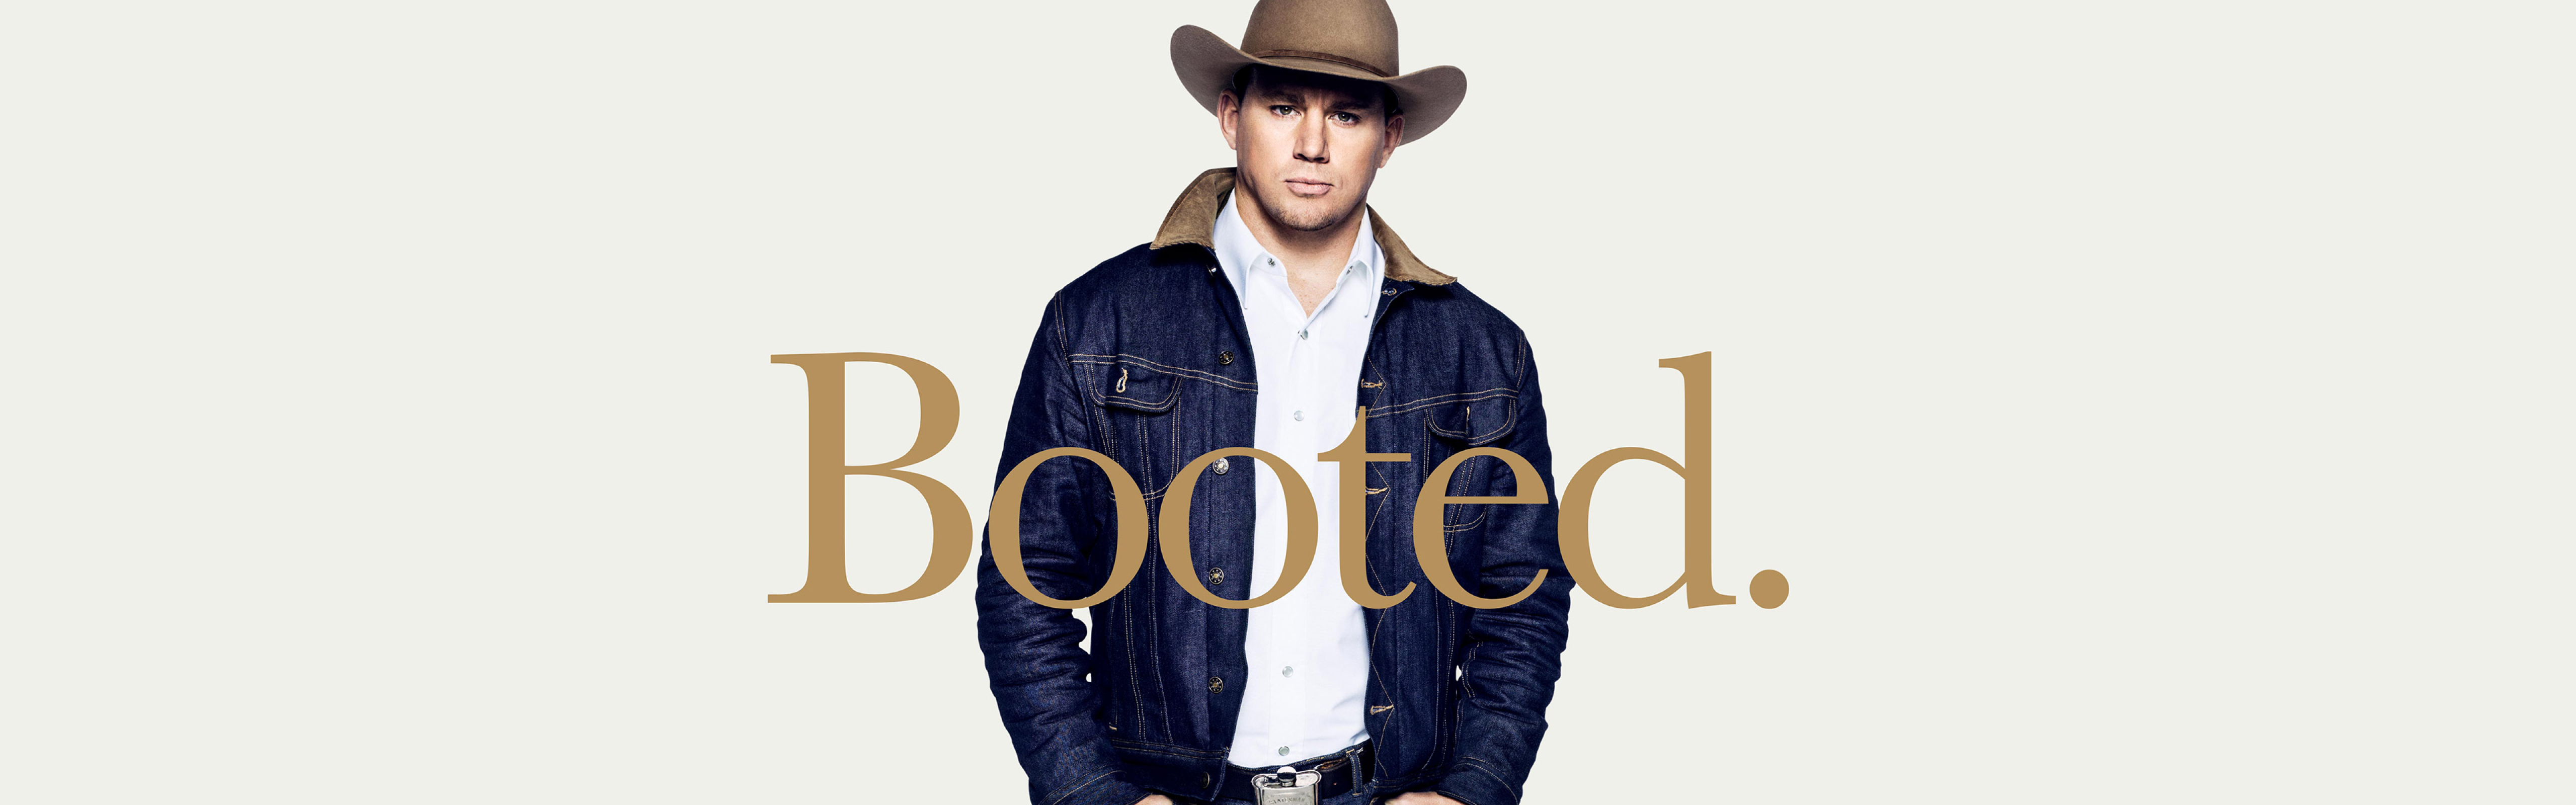 5120x1600 Resolution Channing Tatum As Agent Tequila Kingsman The ...